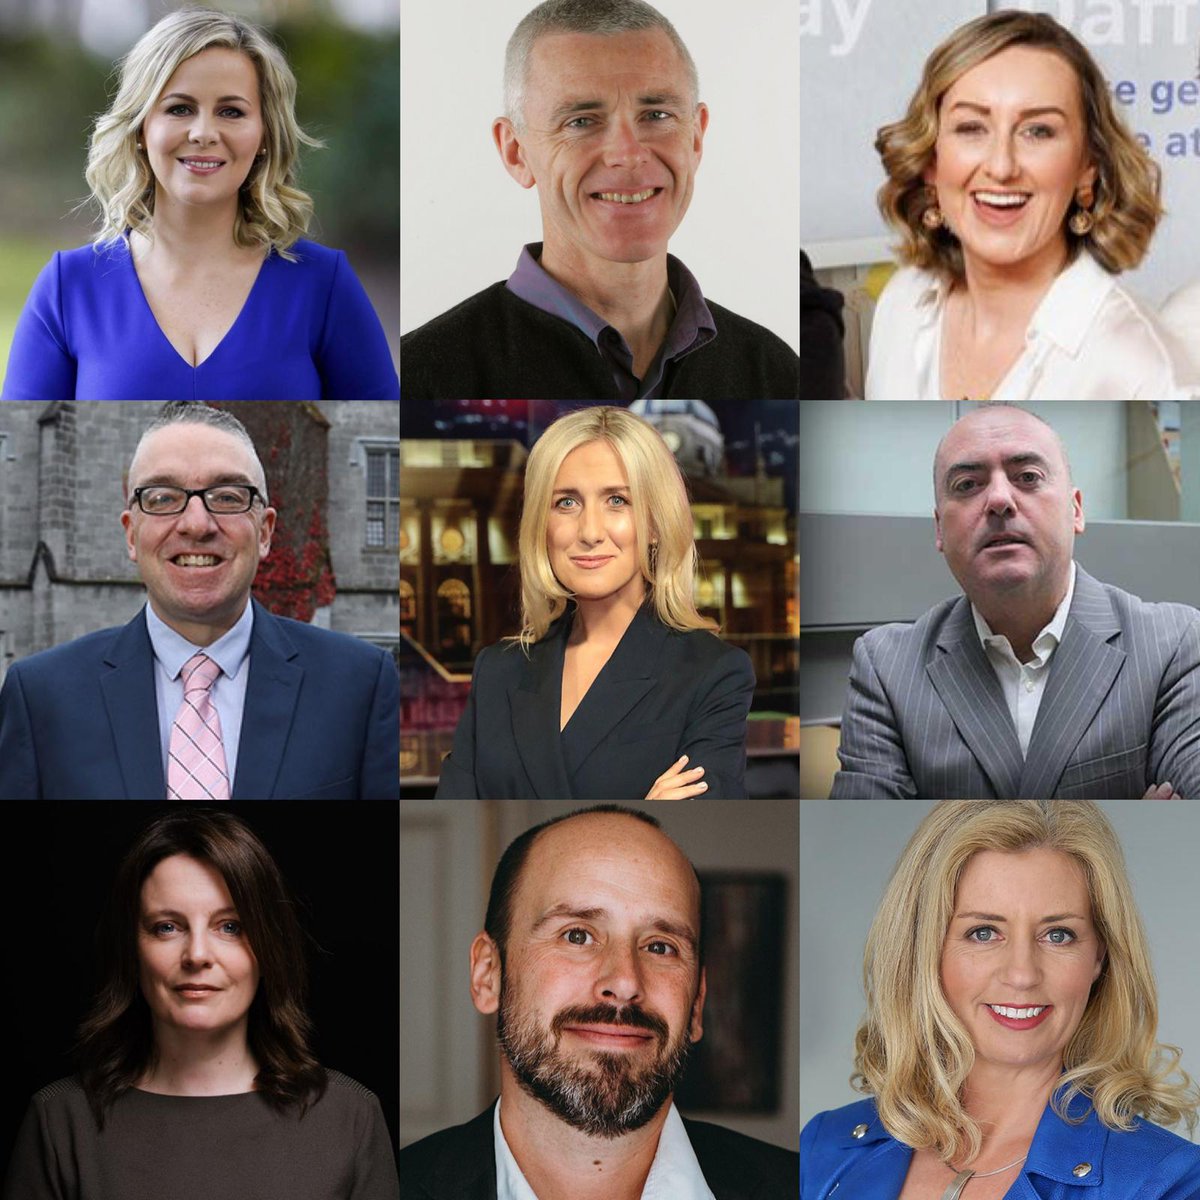 #TonightVMTV at 10pm with @ciarathedoc 🚨Are cancer services in Ireland underfunded? 🚨OJ Simpson dies after cancer battle 🚨ECB leaves key interest rate unchanged @LorrCliff @paulcullenit @DonnaCullen85 @LarryPDonnelly @JohnOBrennan2 @suzannelynch1 @IraSpitzer @sinead_ryan